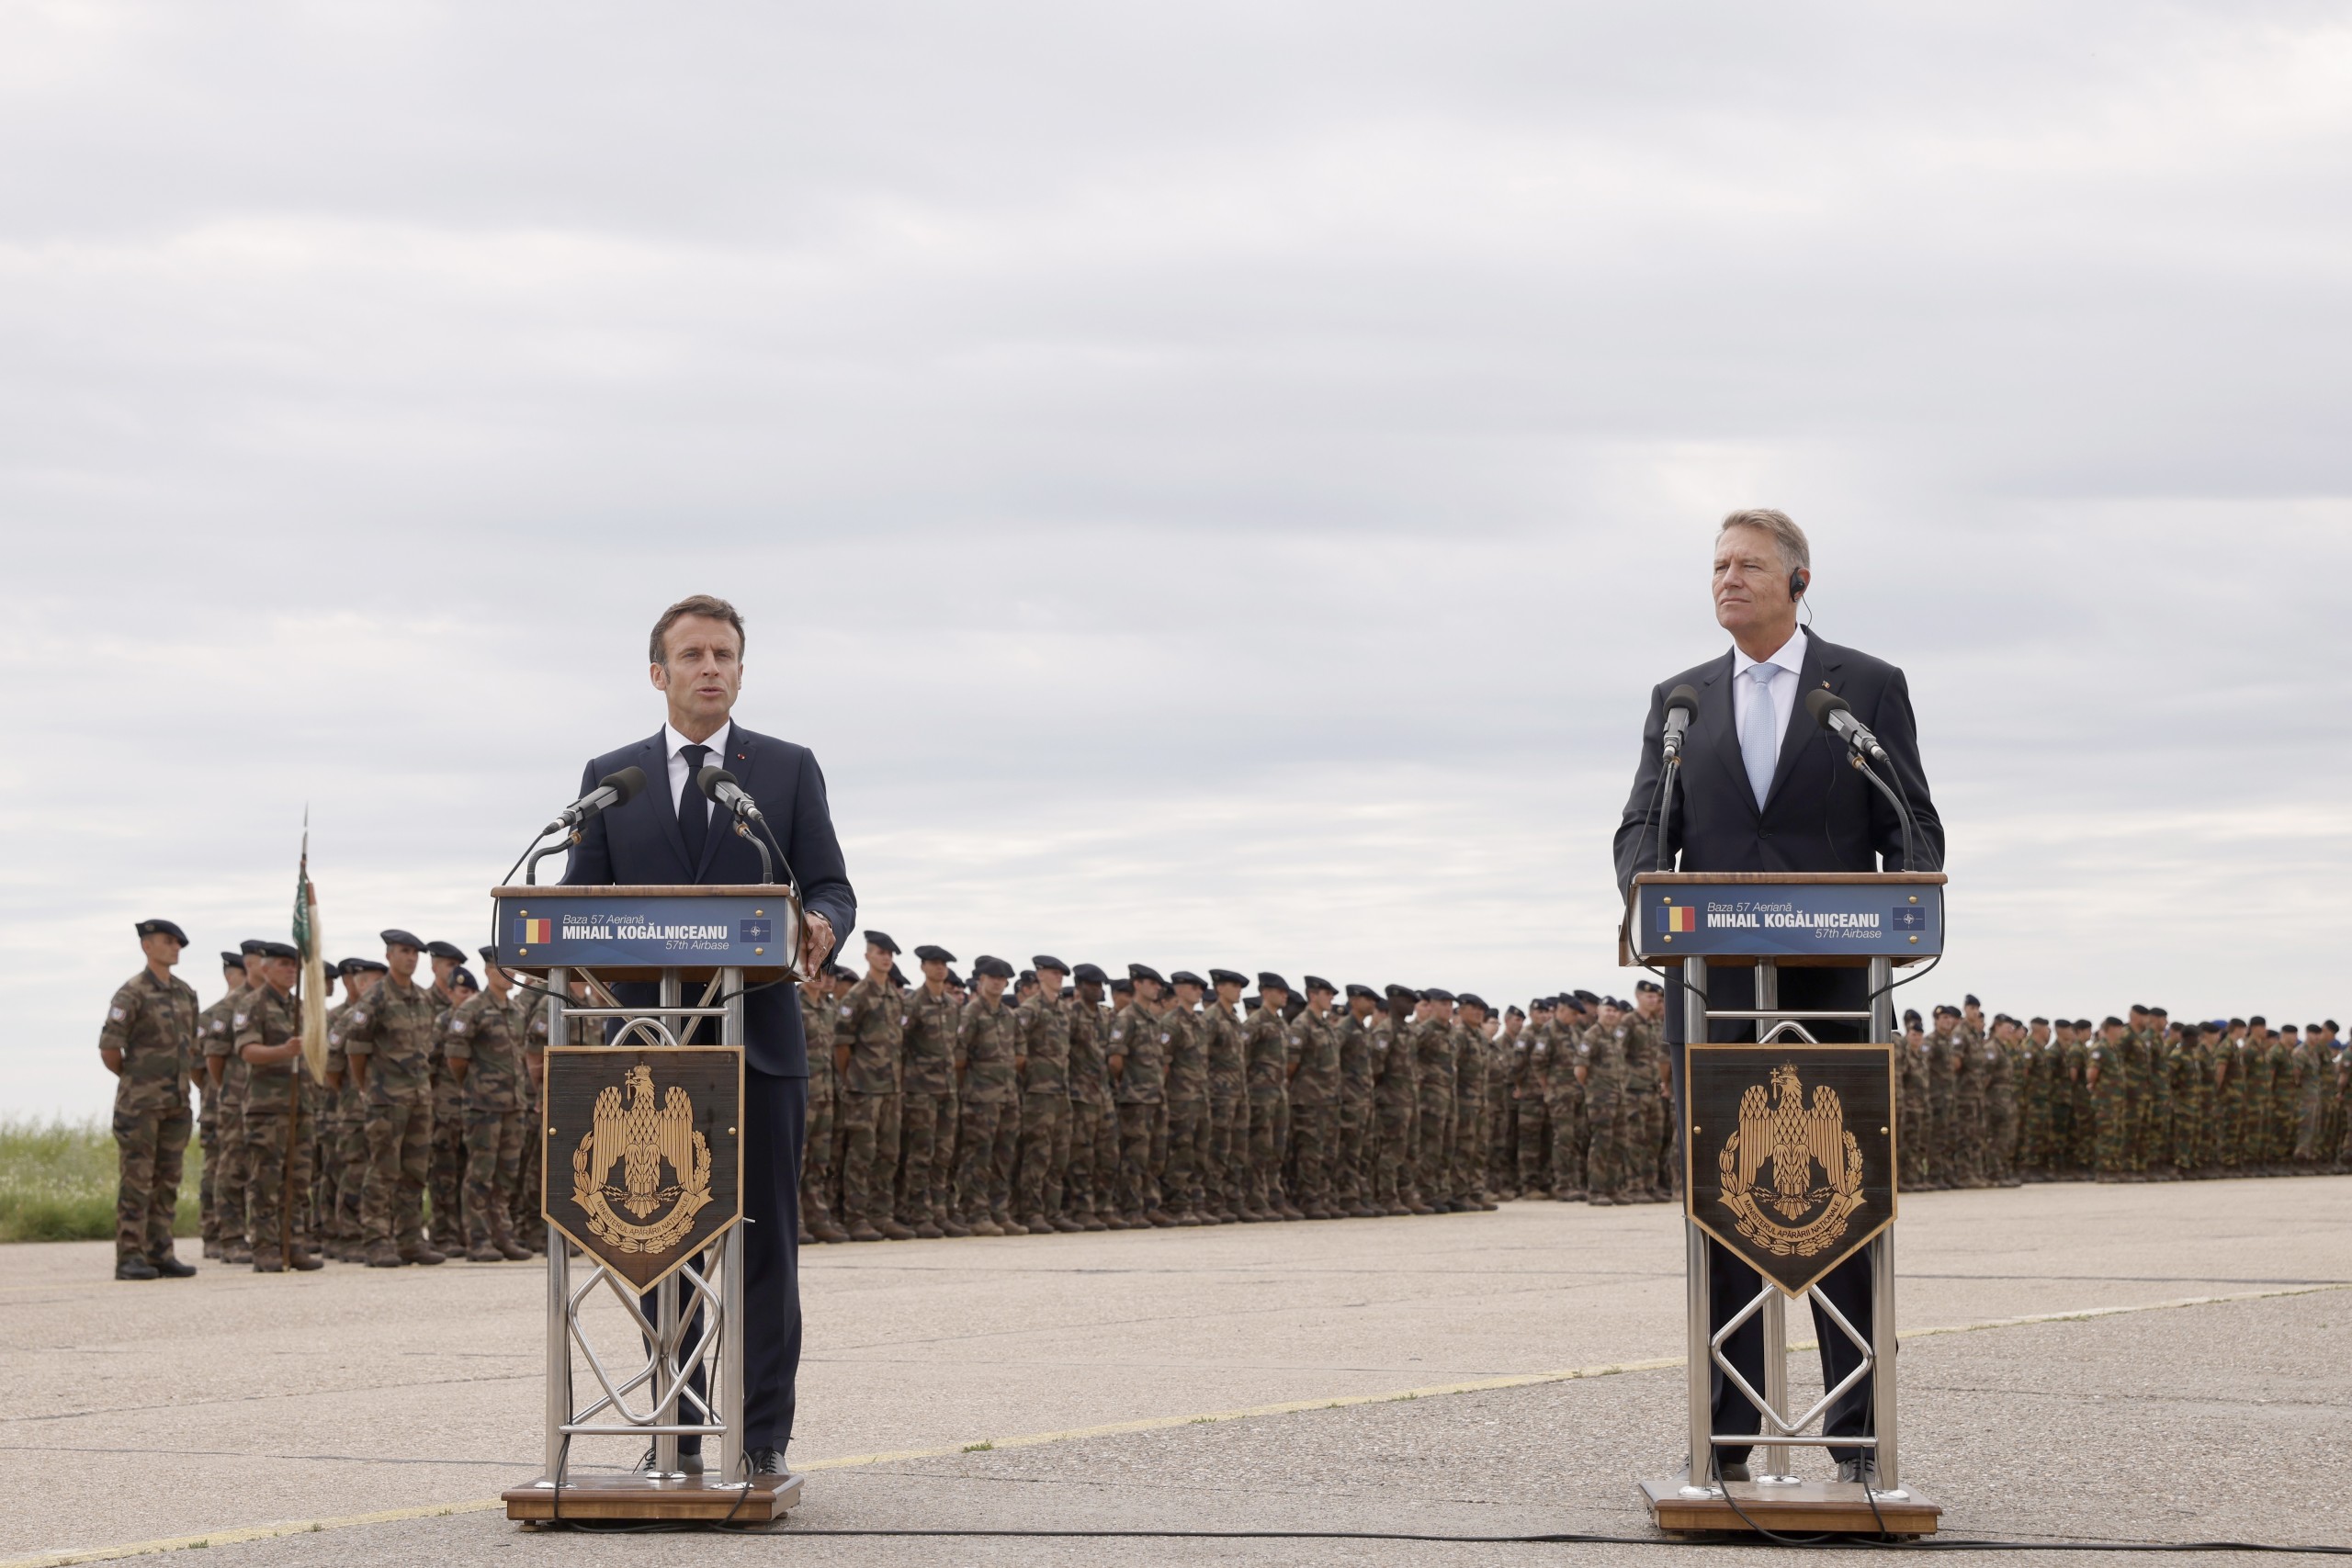 epa10013981 French President Emmanuel Macron (L) and Romanian President Klaus Iohannis (R) deliver statements as they visit NATO forces at the Mihail Kogalniceanu Air Base, near the city of Constanta, Romania, 15 June 2022. Macron is visiting Romania to hold bilateral talks and meet with NATO troops stationed at the airbase.  EPA/YOAN VALAT / POOL